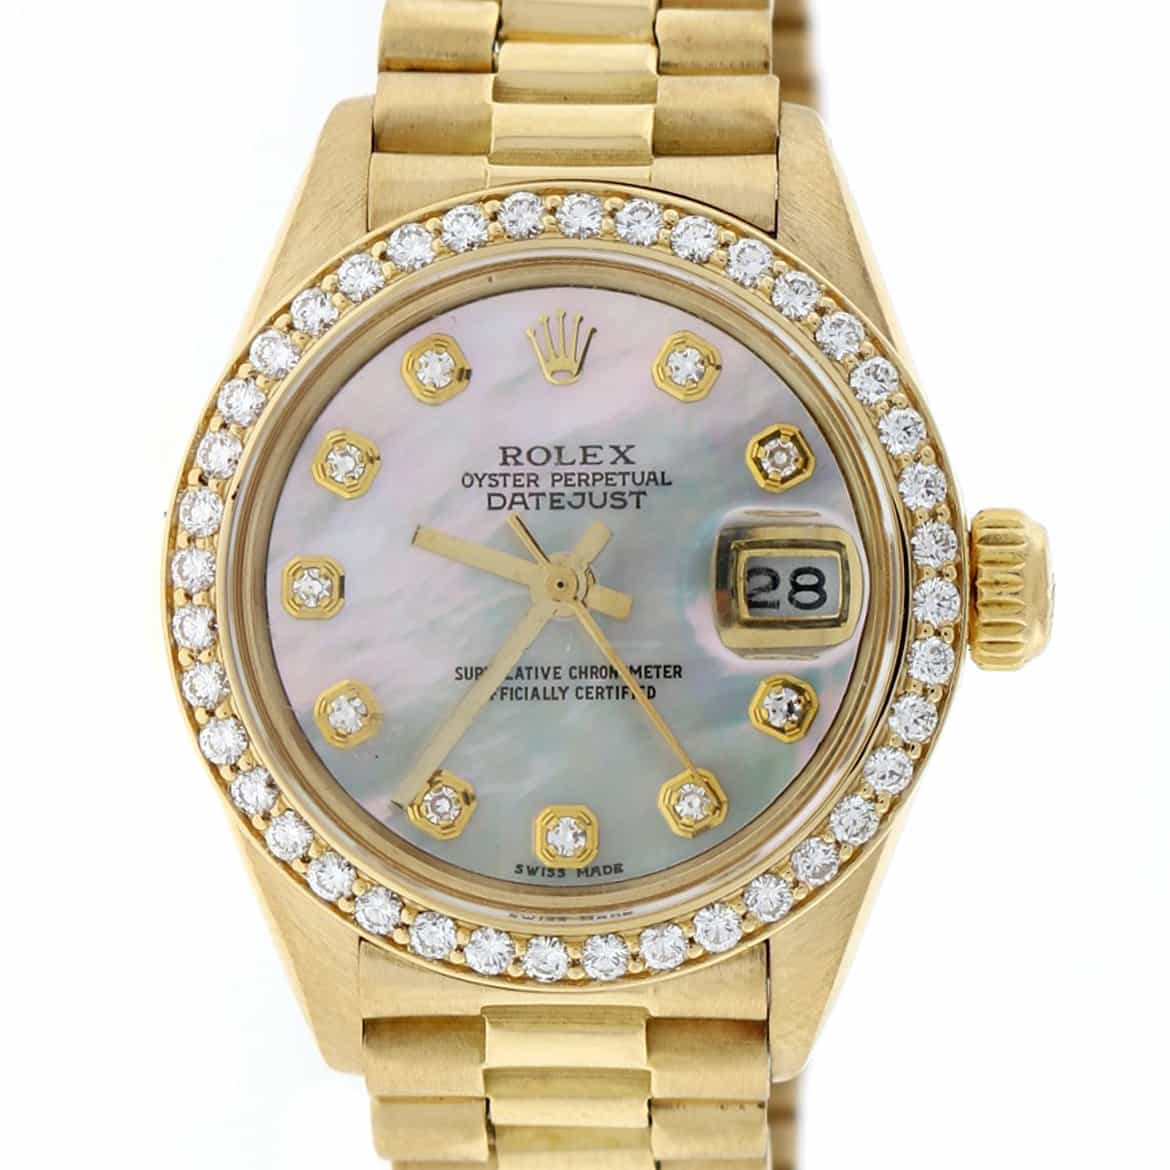 ROLEX OYSTER PERPETUAL DATEJUST Presidential 26mm 18K Yellow Gold